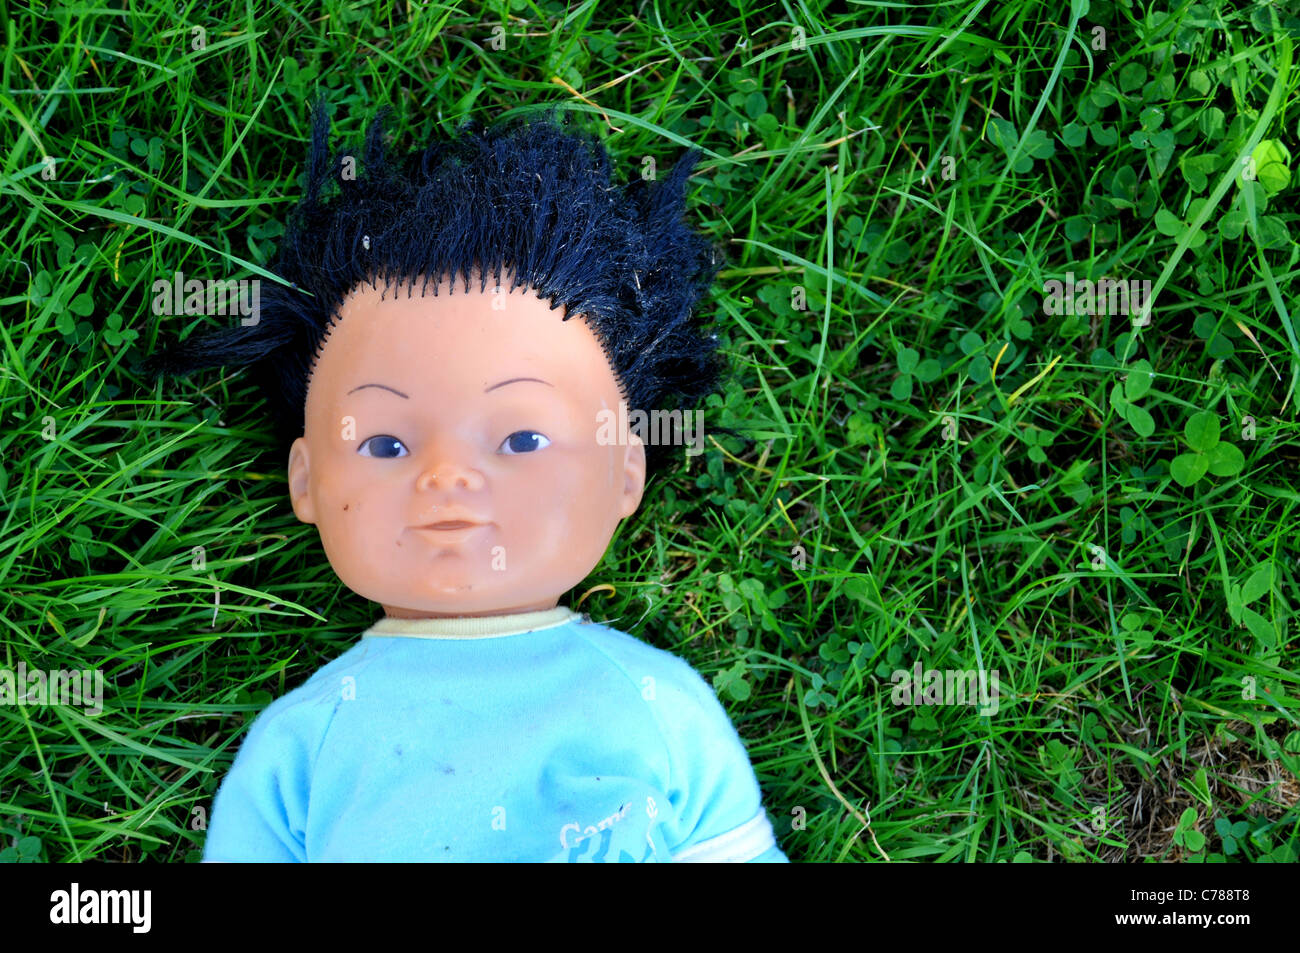 Plastic ethnic male doll abandoned thrown away on grass Stock Photo